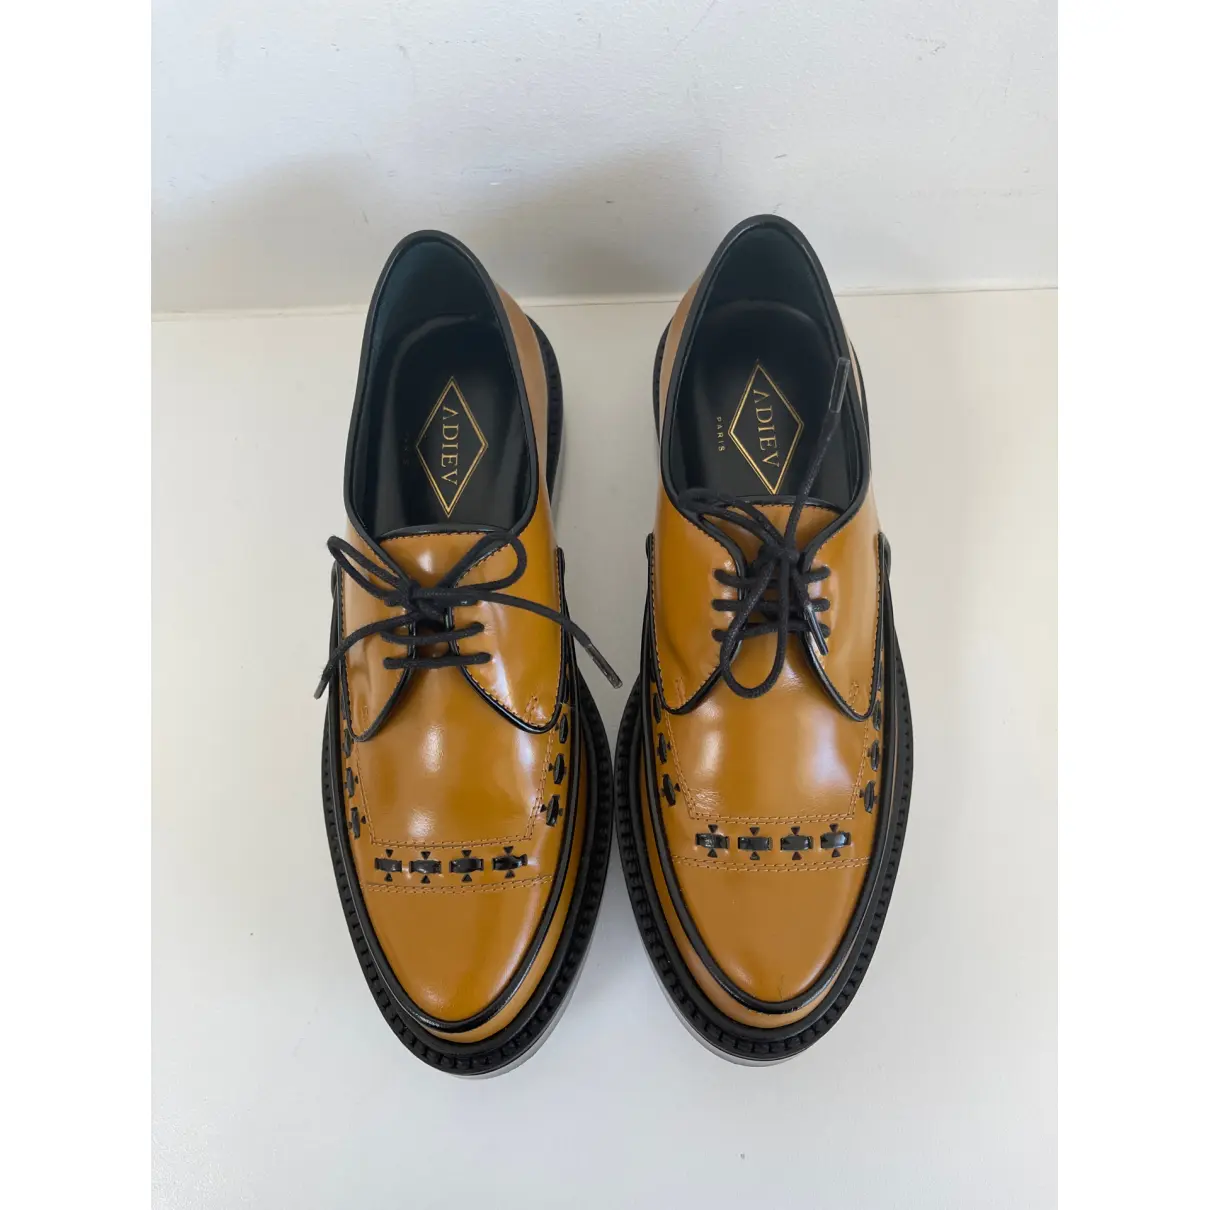 Buy Adieu Leather lace ups online